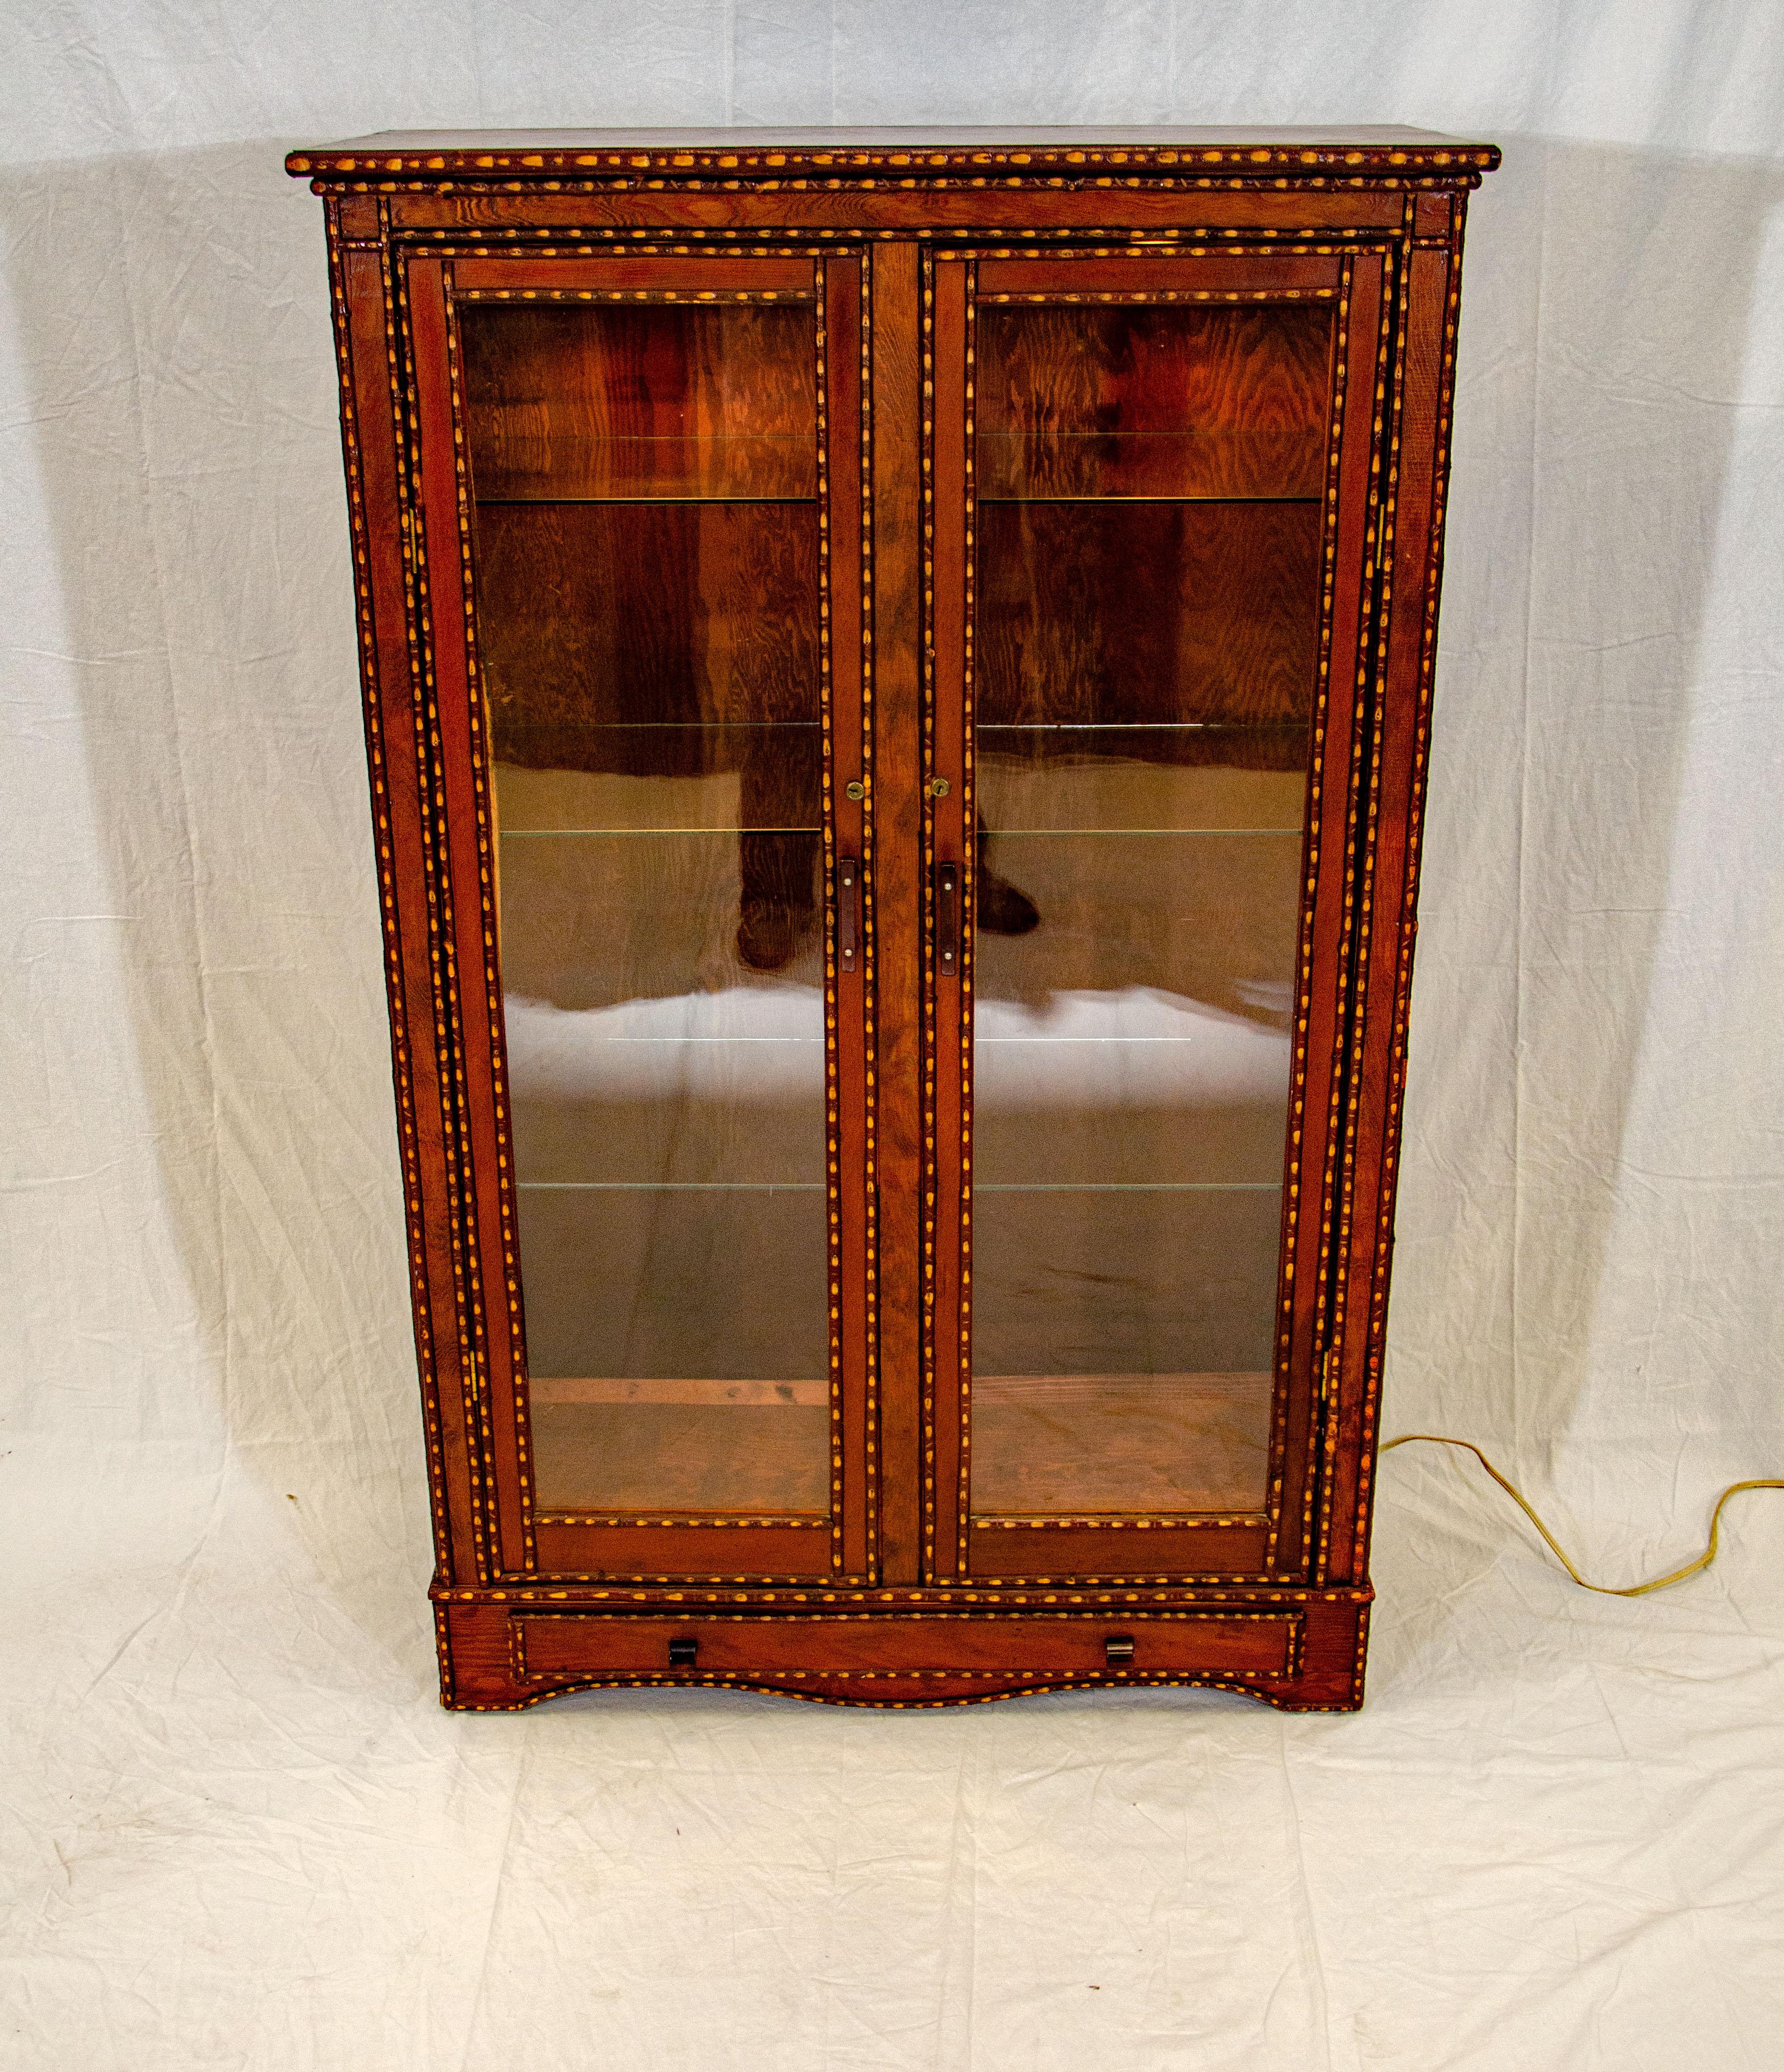 This unusual cabinet in the country cabin style can be used as a bookcase or dish display. The shelves are glass and there are lights installed. The handles on the doors and bottom drawer are a dark apple juice bakelite color. The interior spaces